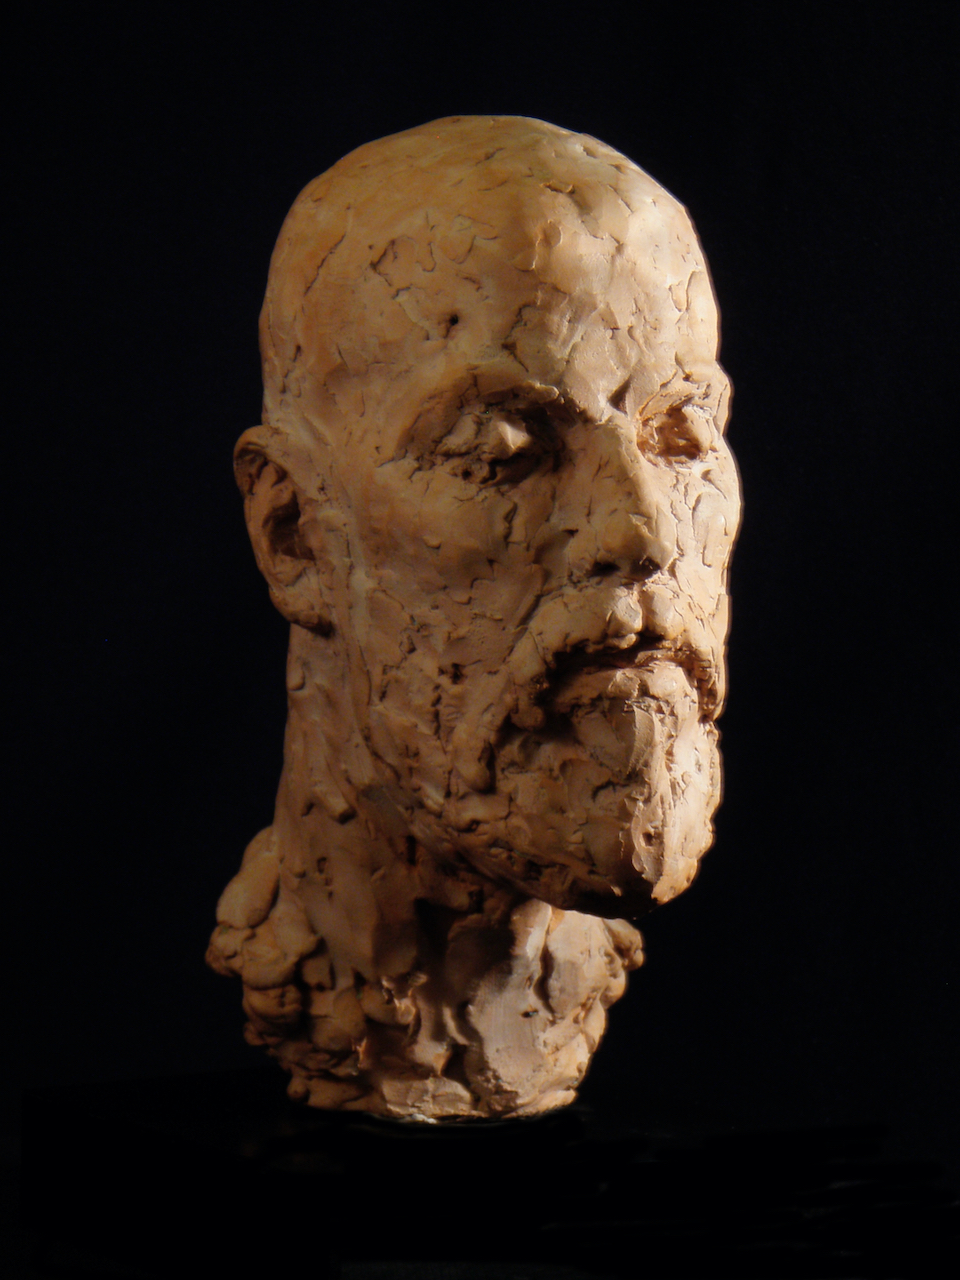 Fired clay sculpture of Daniel Marcus Clarke, with his eyes closed